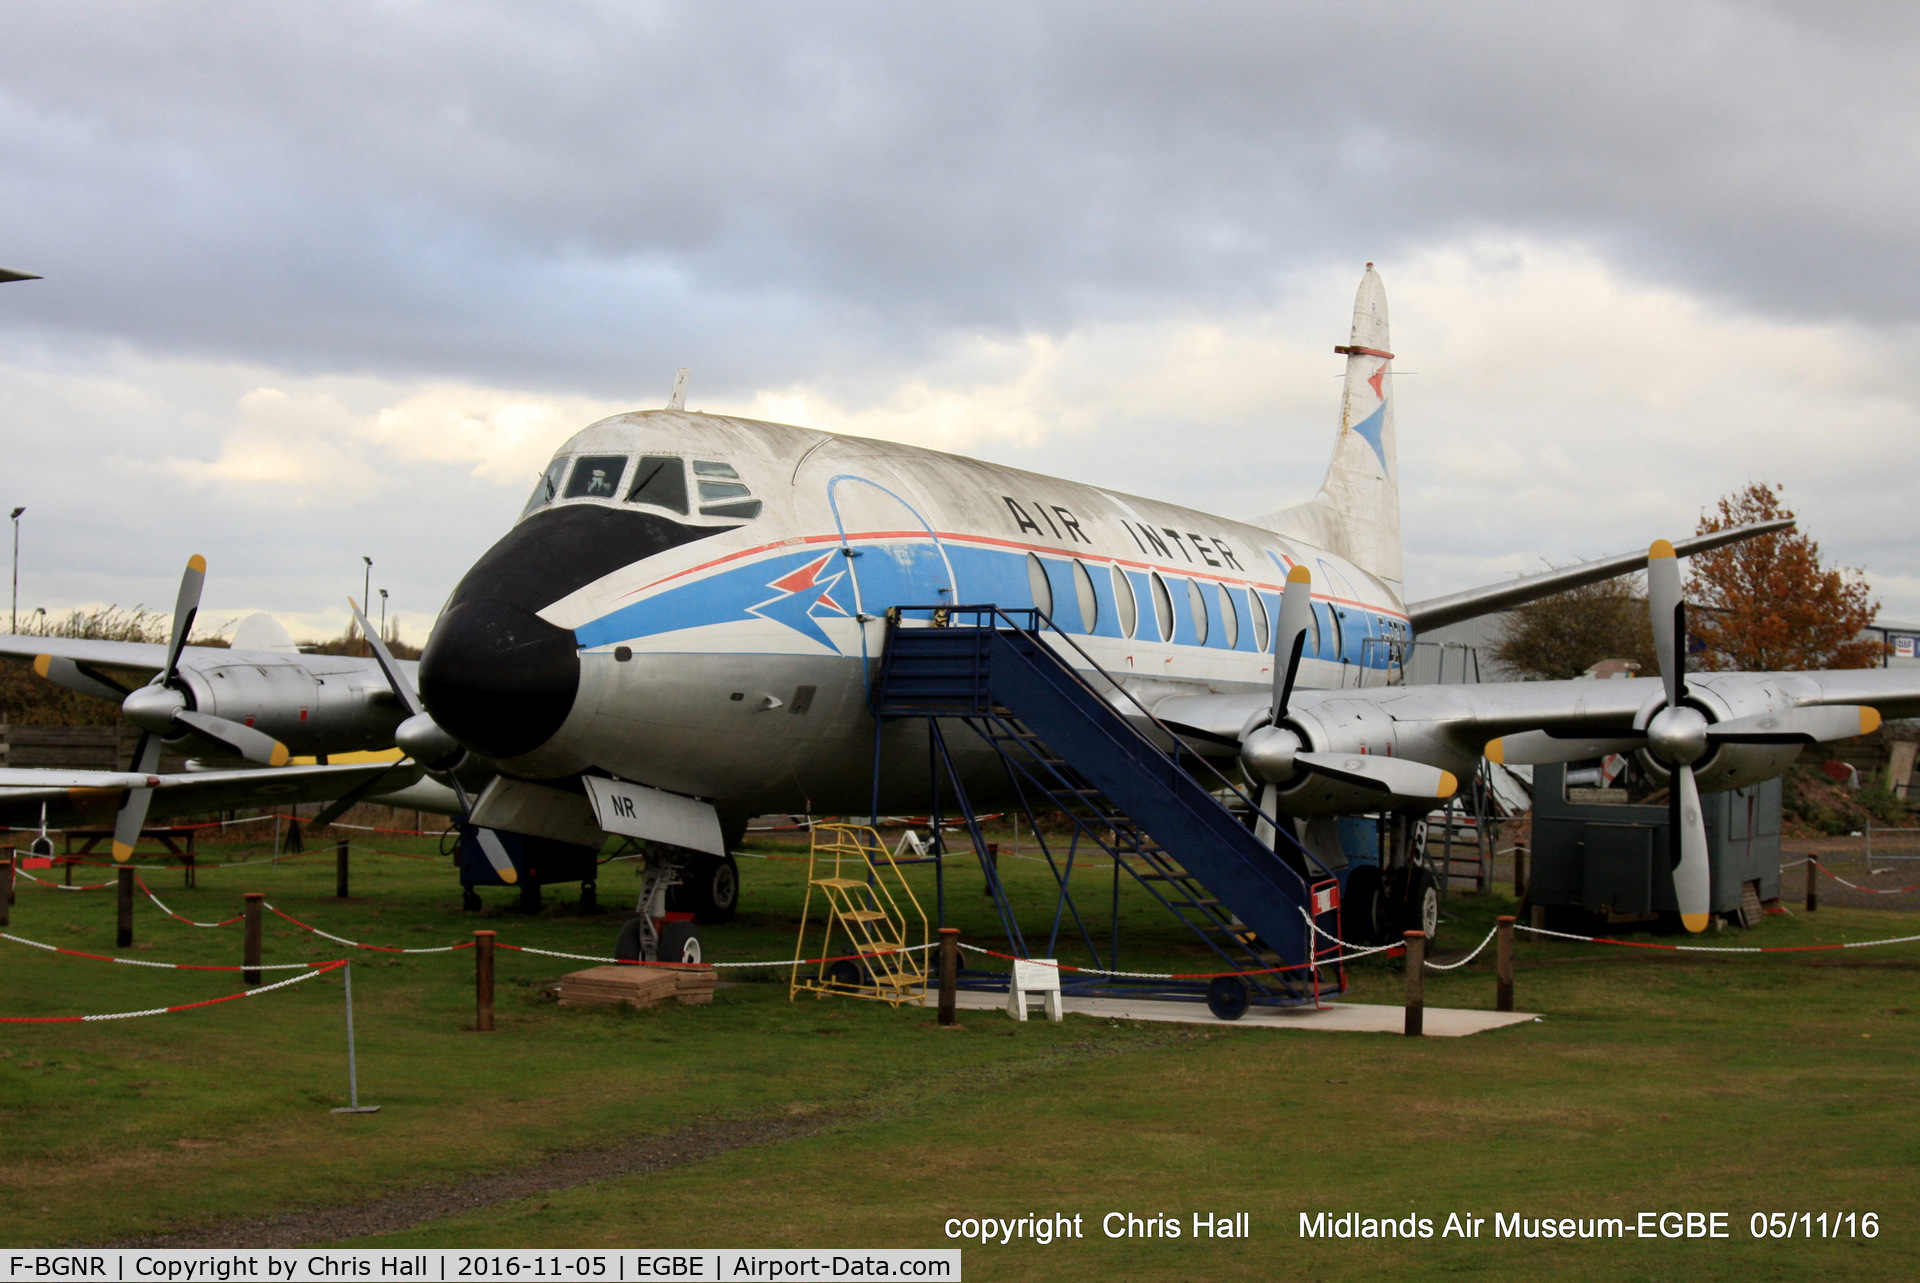 F-BGNR, 1954 Vickers Viscount 708 C/N 35, preserved at the Midland Air Museum